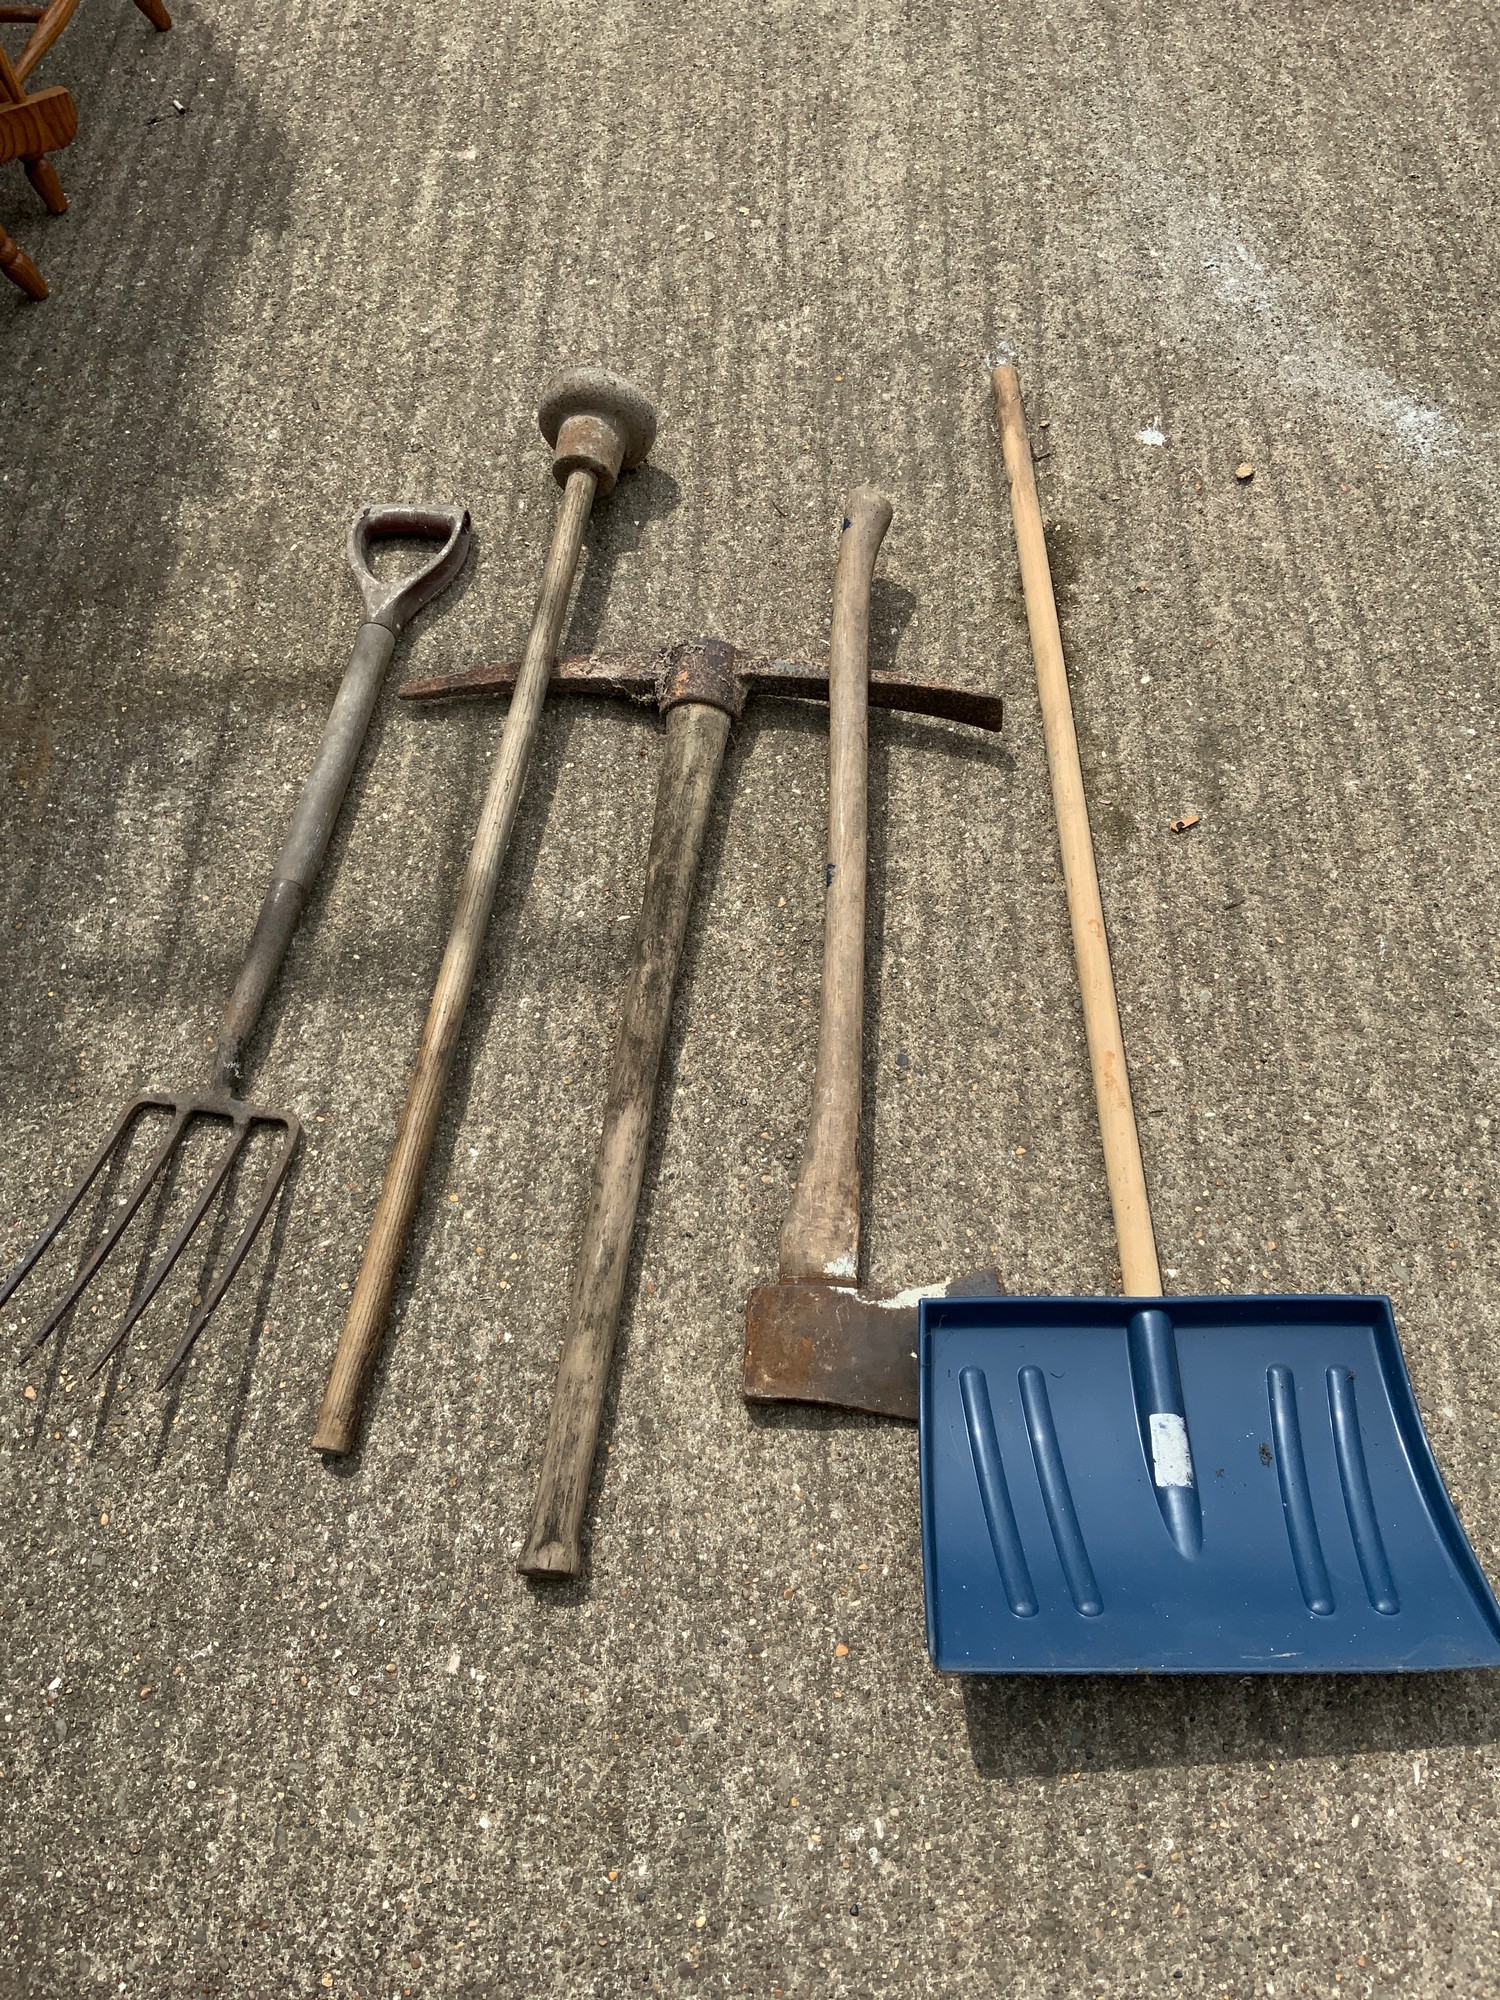 Axe, Pick Axe and Tamper etc